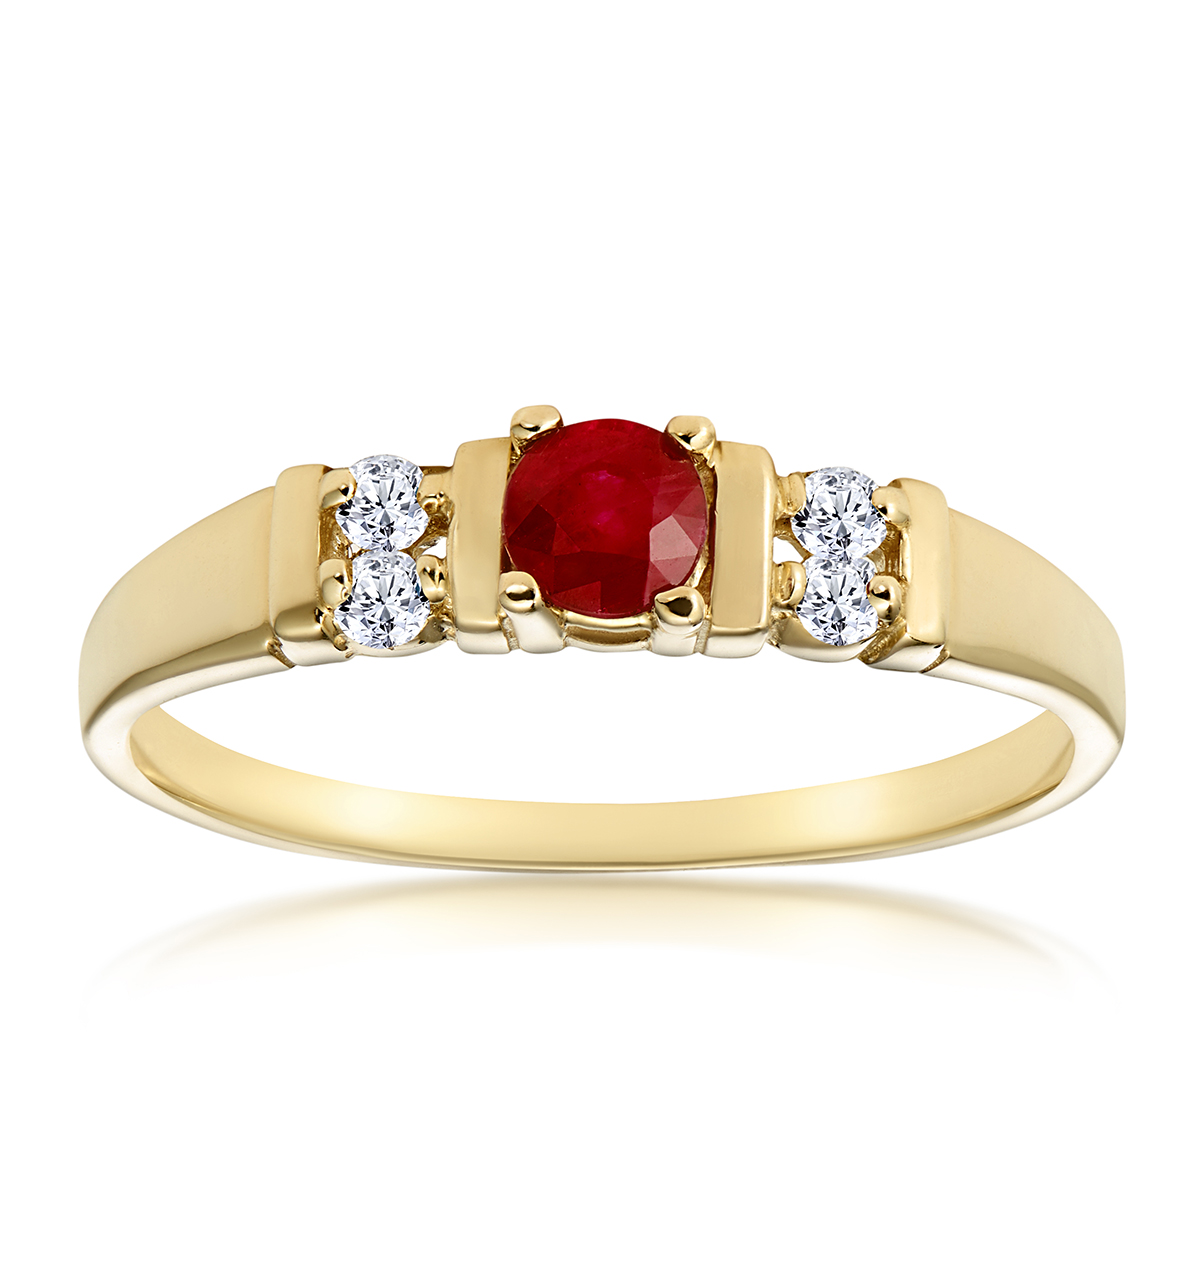 Ruby Rings | Over 170 Unique Styles | TheDiamondStore.co.uk™